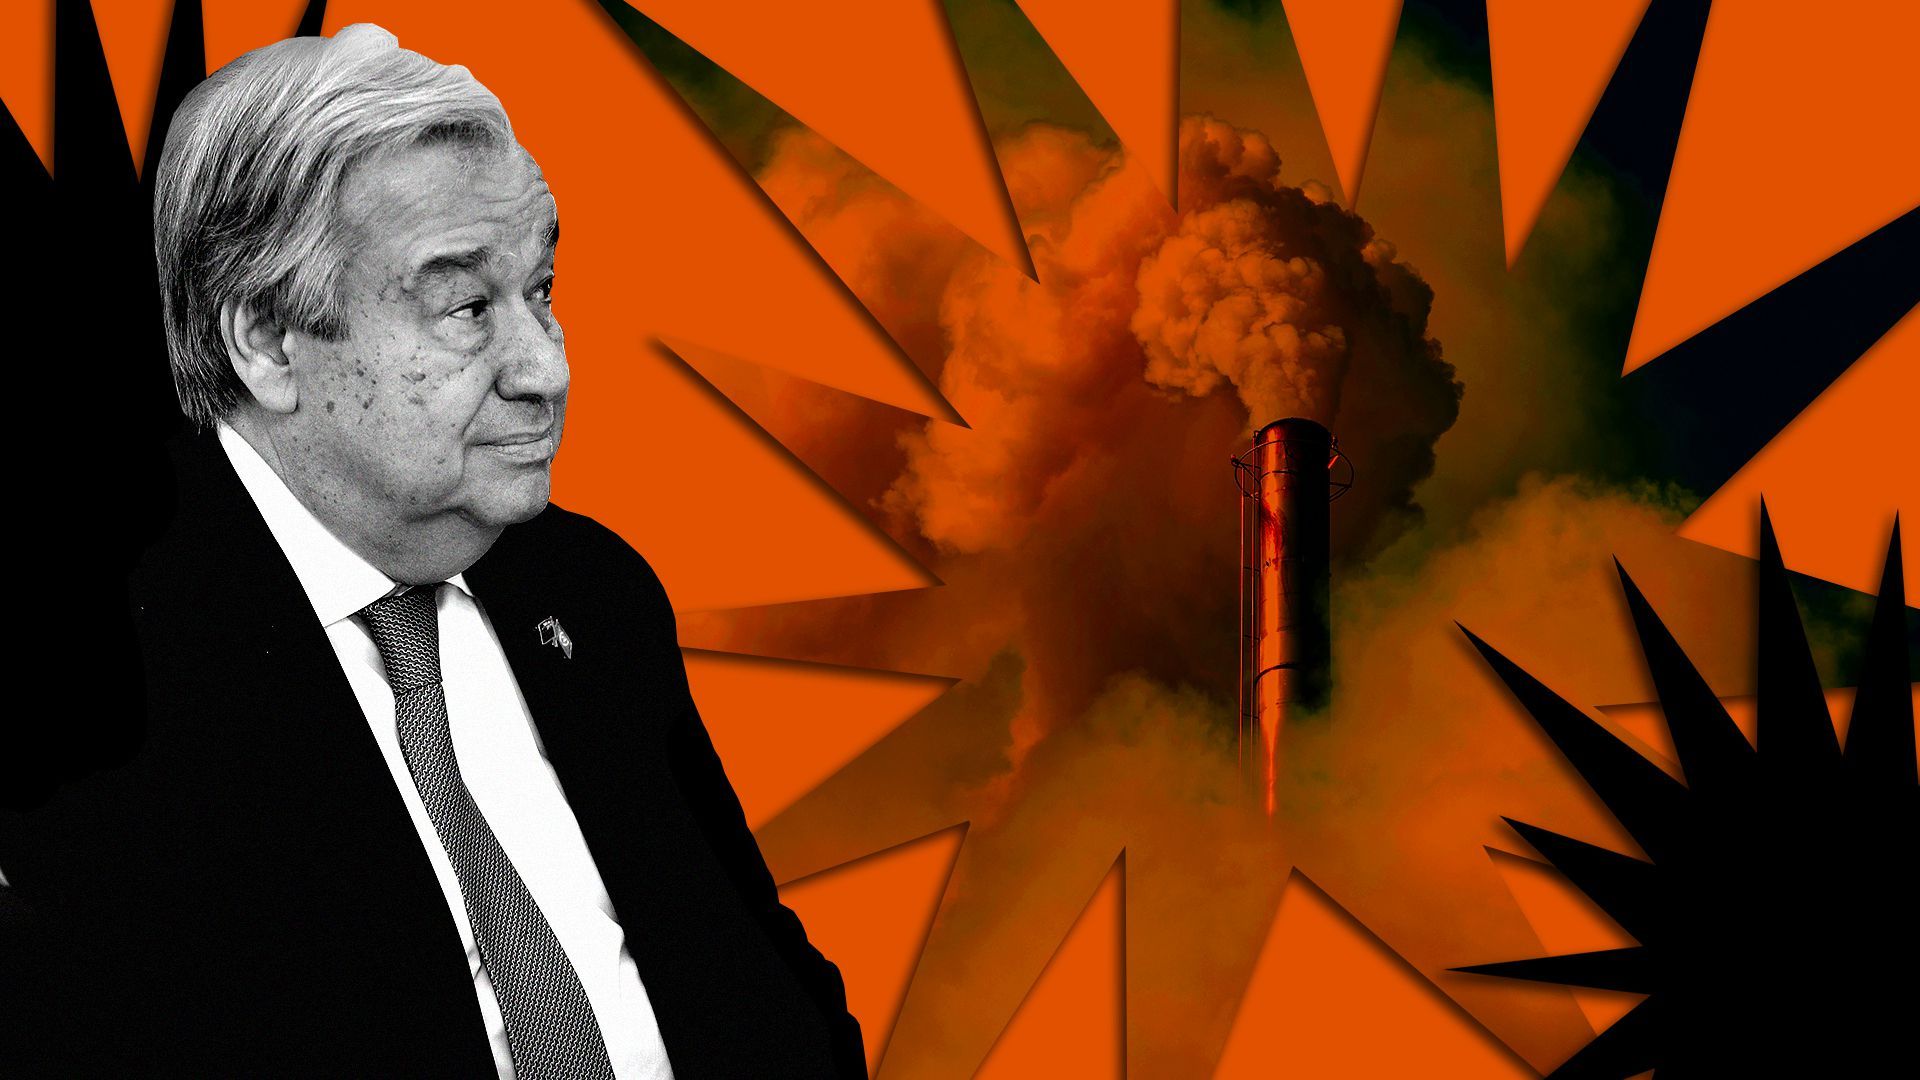 Photo illustration of Secretary-General Guterres in front of bursting shapes, including one filled with images of greenhouse gas emissions